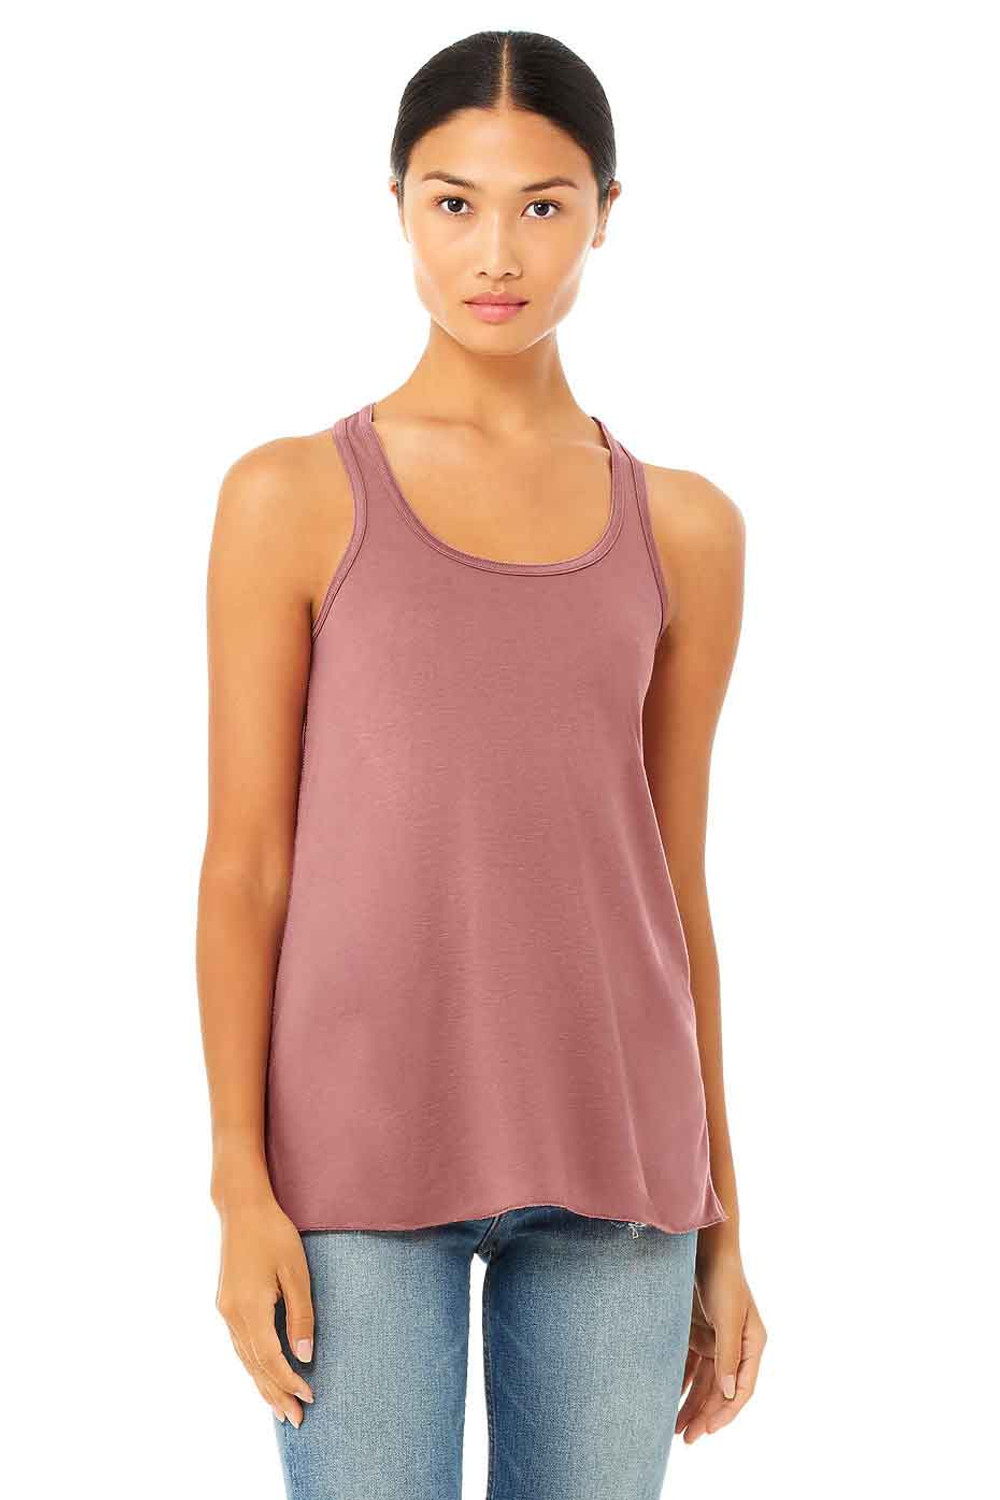 Play Something Country Women's Flowy Tank Top (Athletic Heather) - B-WEAR